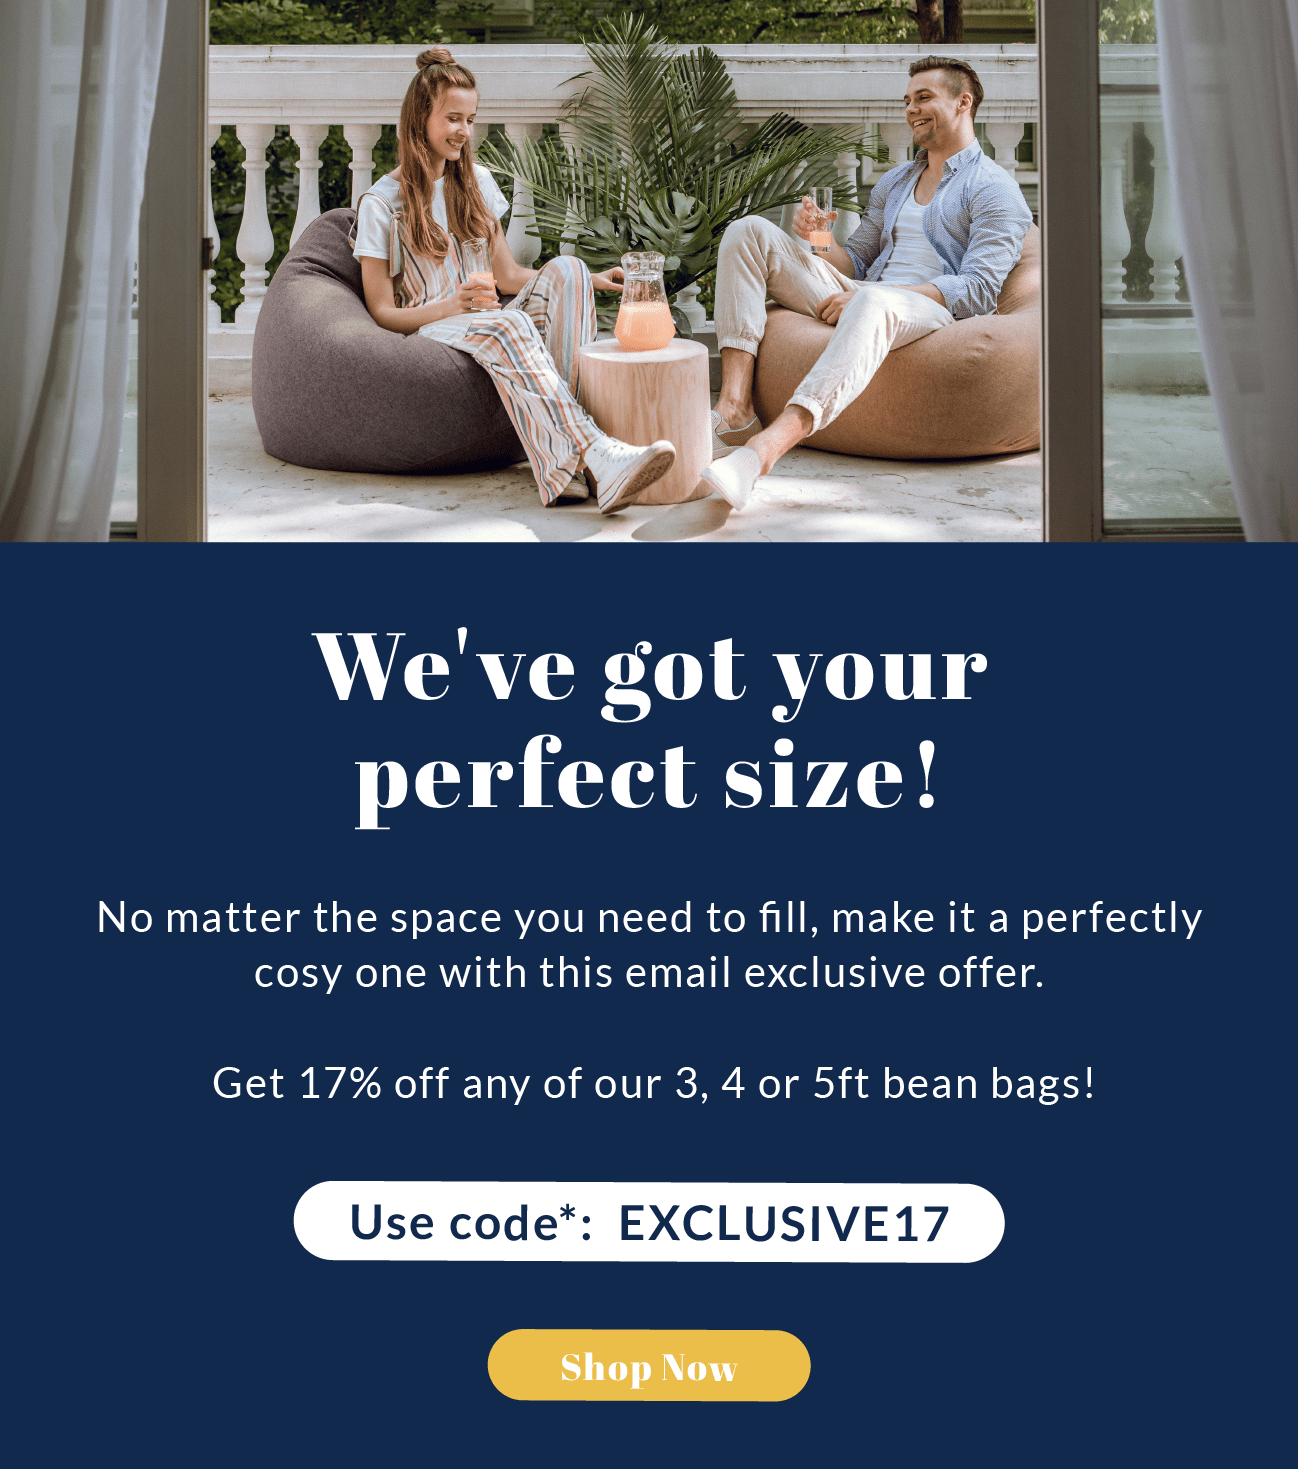 We've got your perfect size! No matter the space you need to fill, make it a perfectly cosy one with this email exclusive offer. Get 17% off any of our 3, 4 or 5ft bean bags! Use code*: EXCLUSIVE17 Shop Now